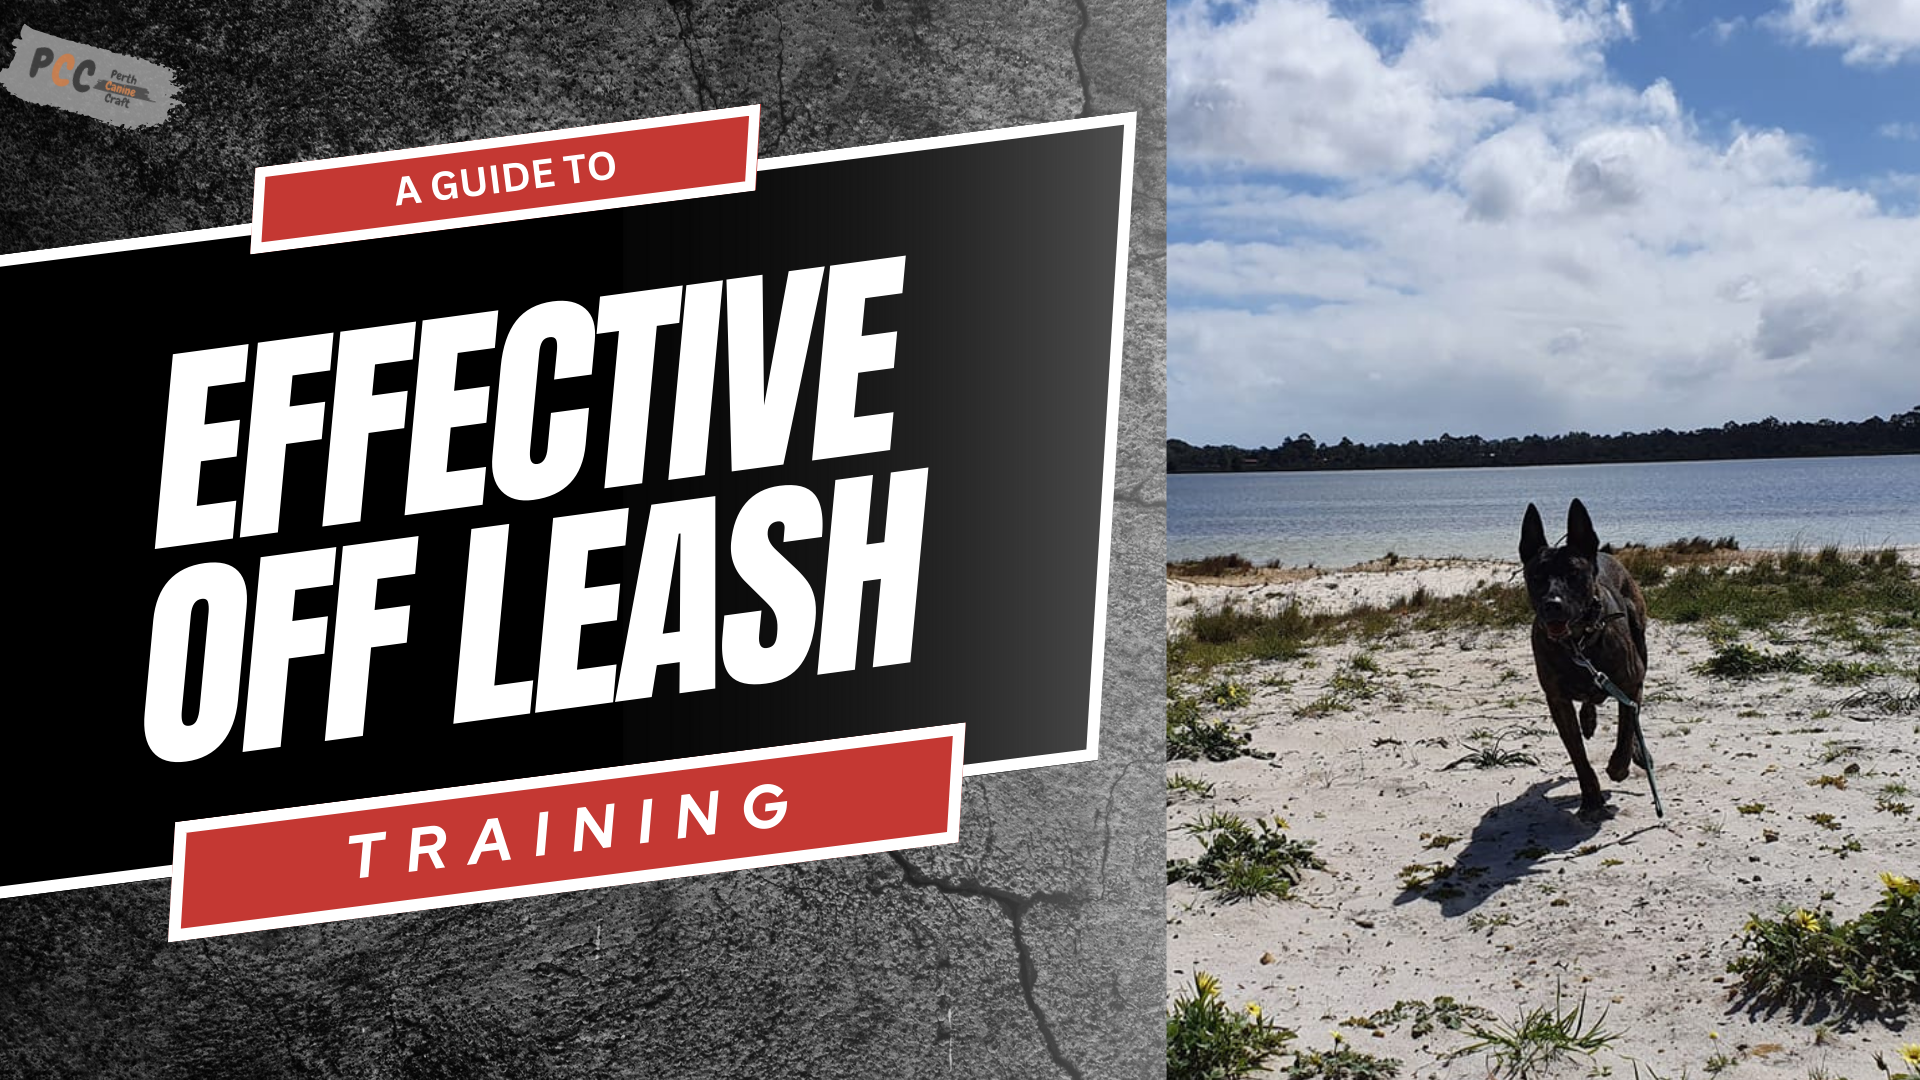 A guide to effective off leash training